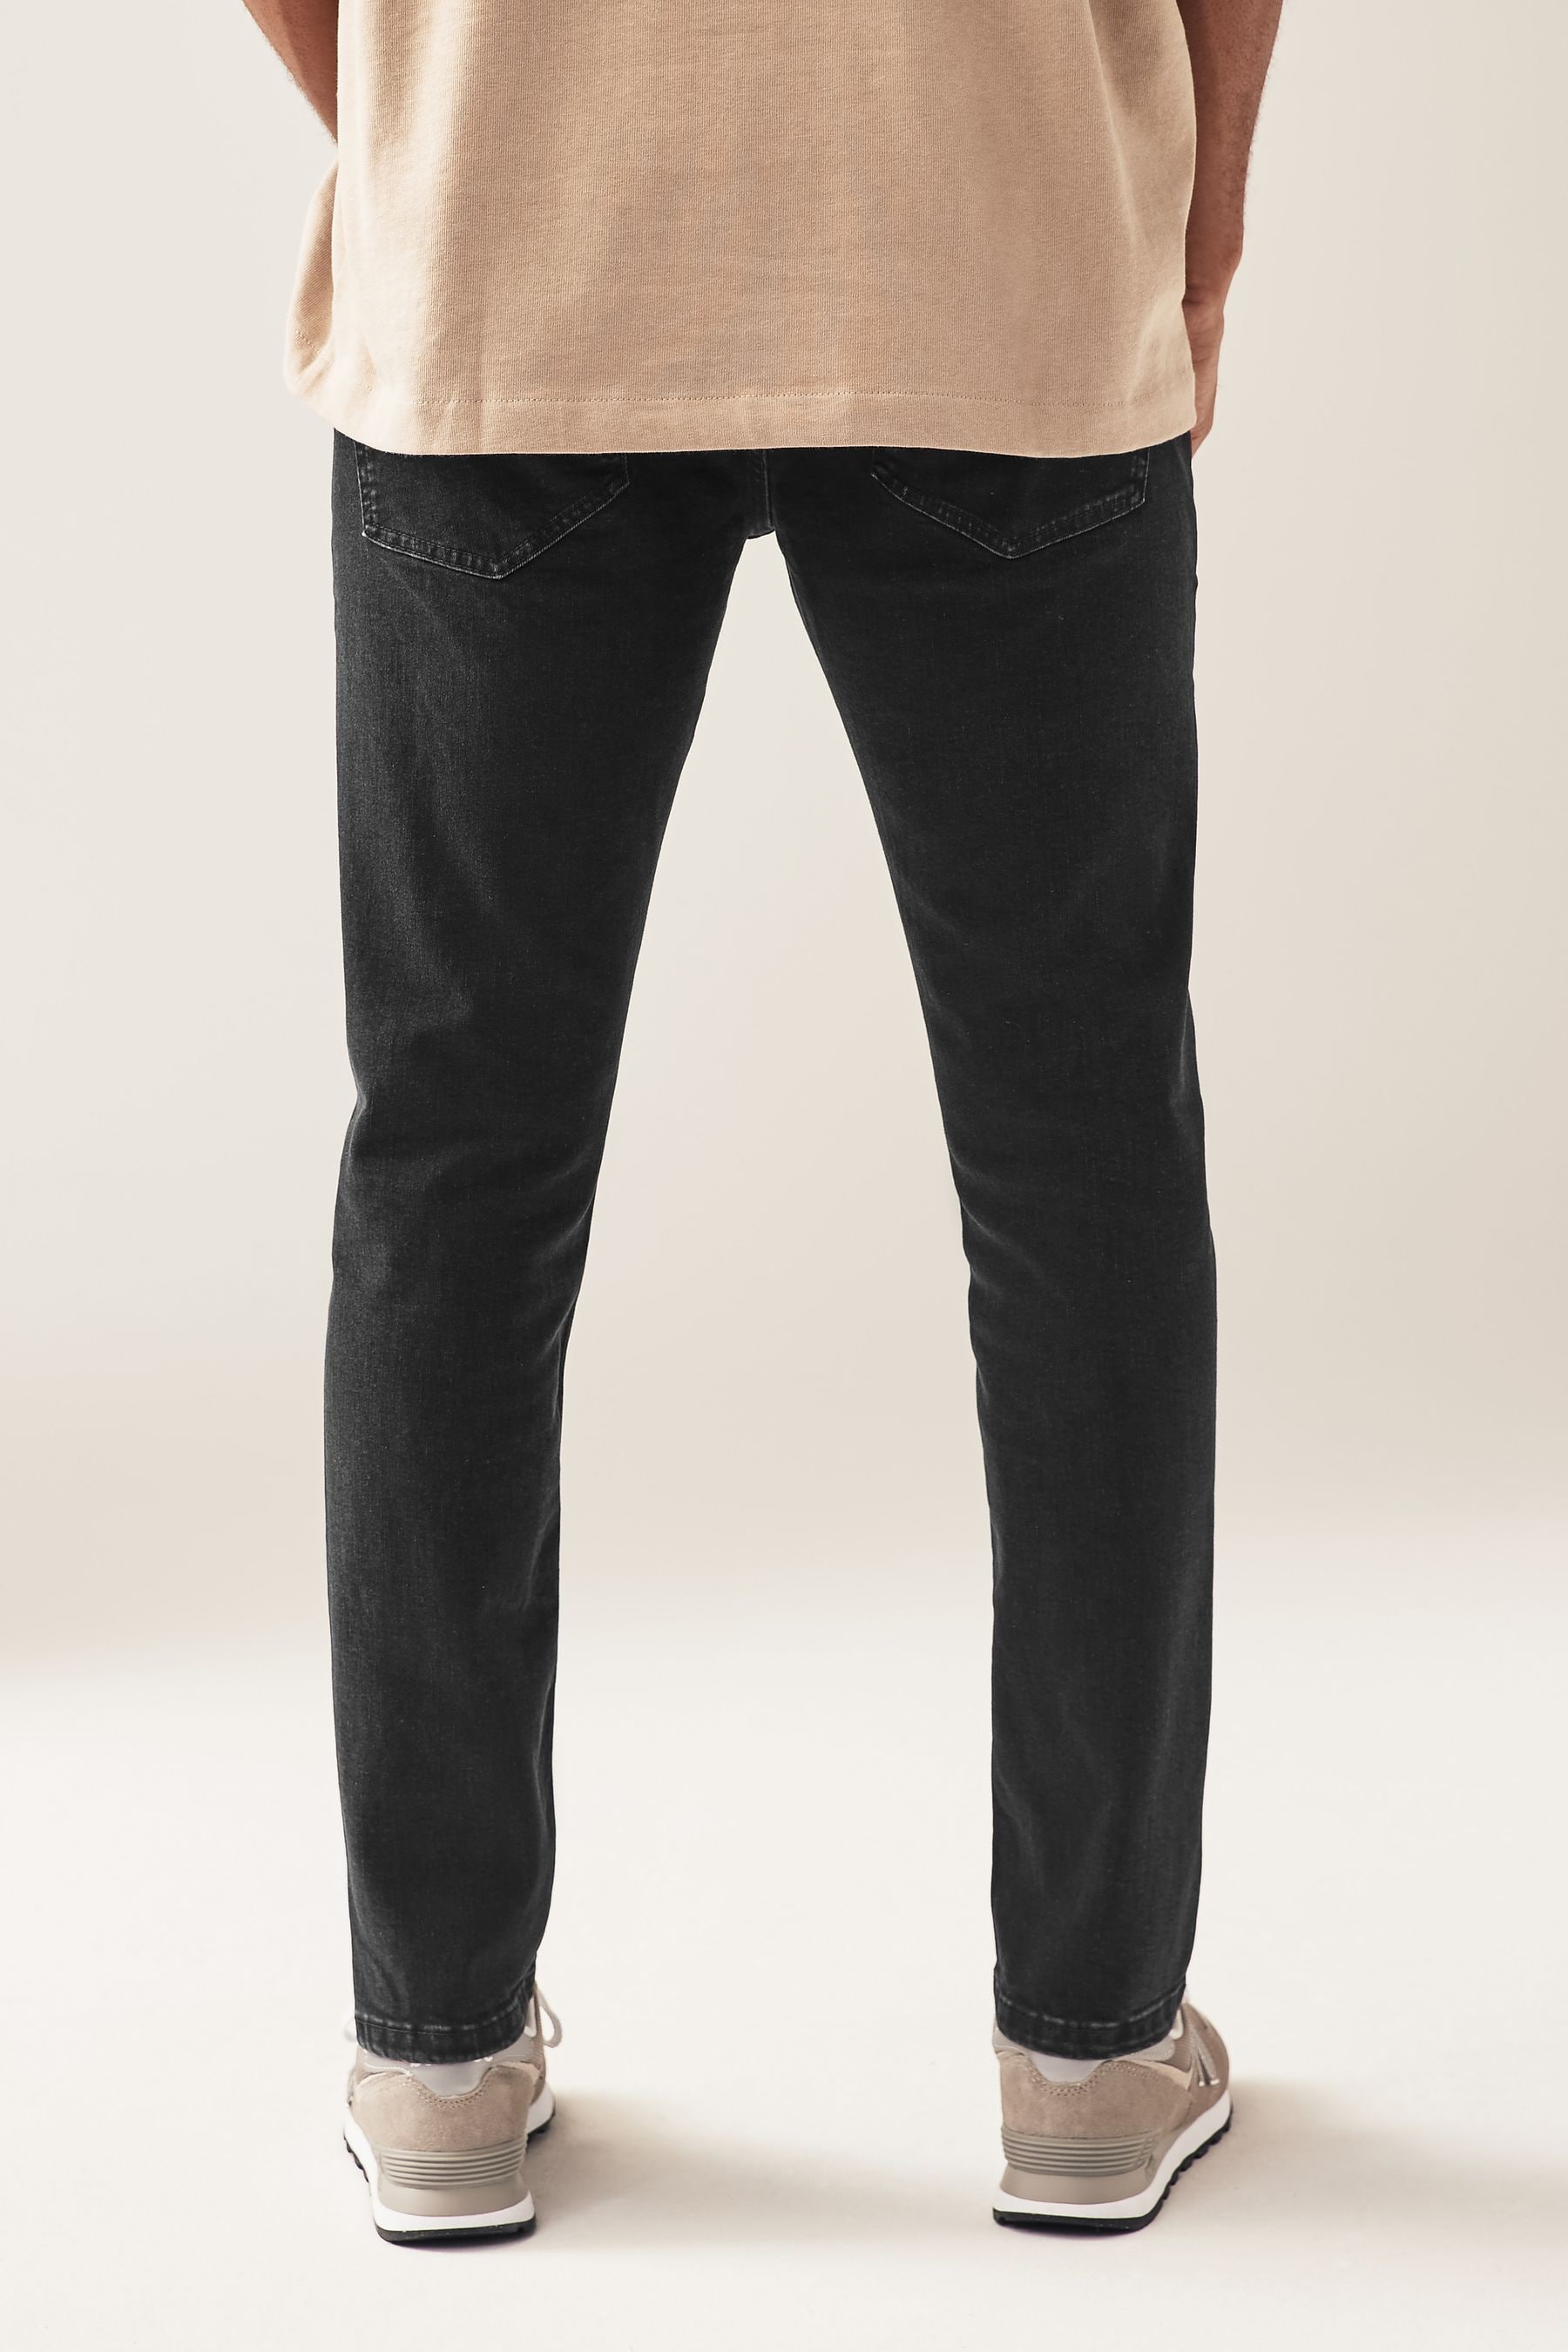 Buy Authentic Stretch Jeans from the Next UK online shop